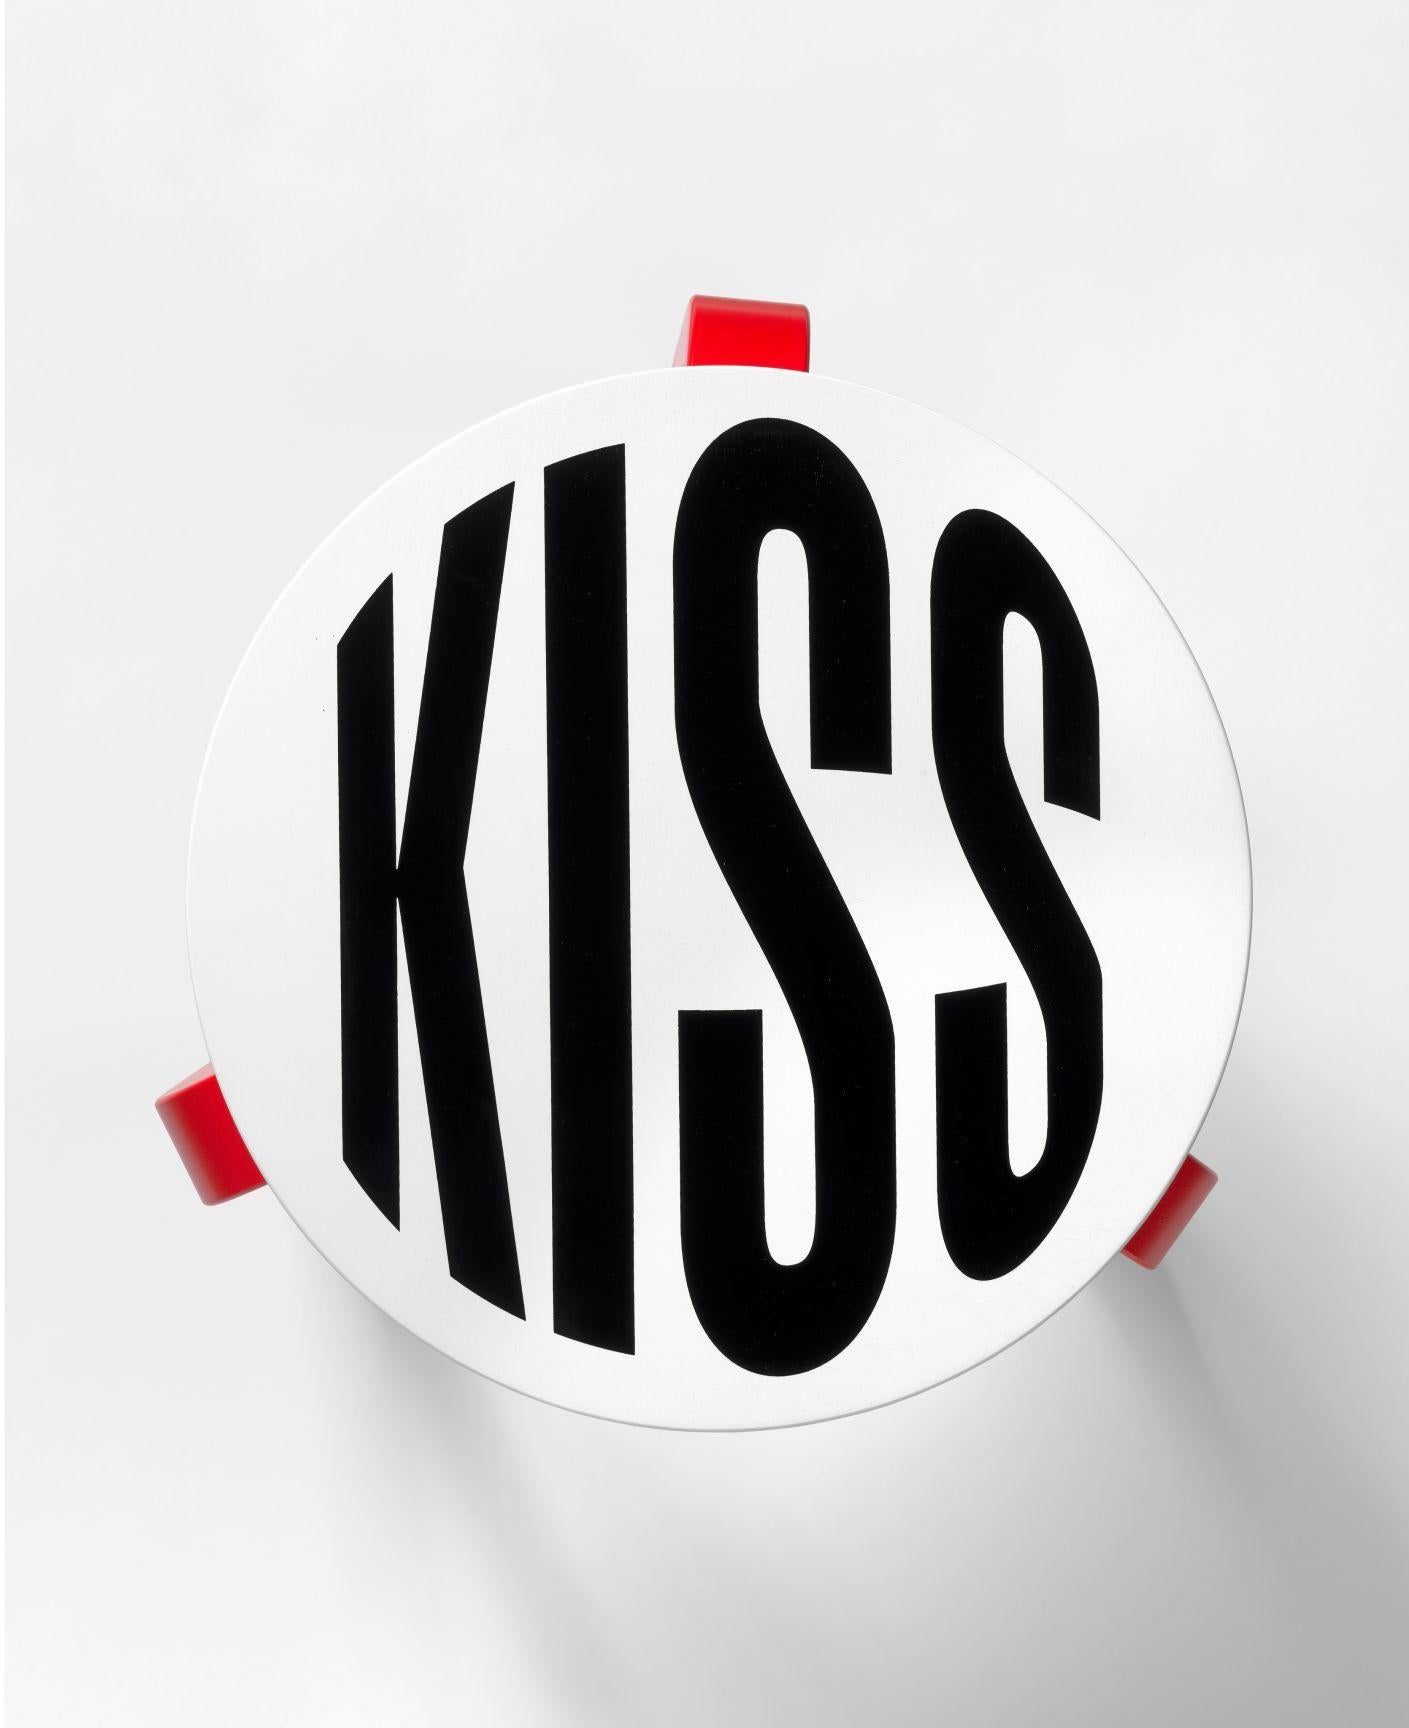 Untitled (Kiss) marries Alvar Aalto’s classic piece of modern furniture design, Stool 60, with a newly commissioned work by conceptual artist Barbara Kruger. Finished in Kruger’s signature black, white and red, this bespoke stool was produced in an